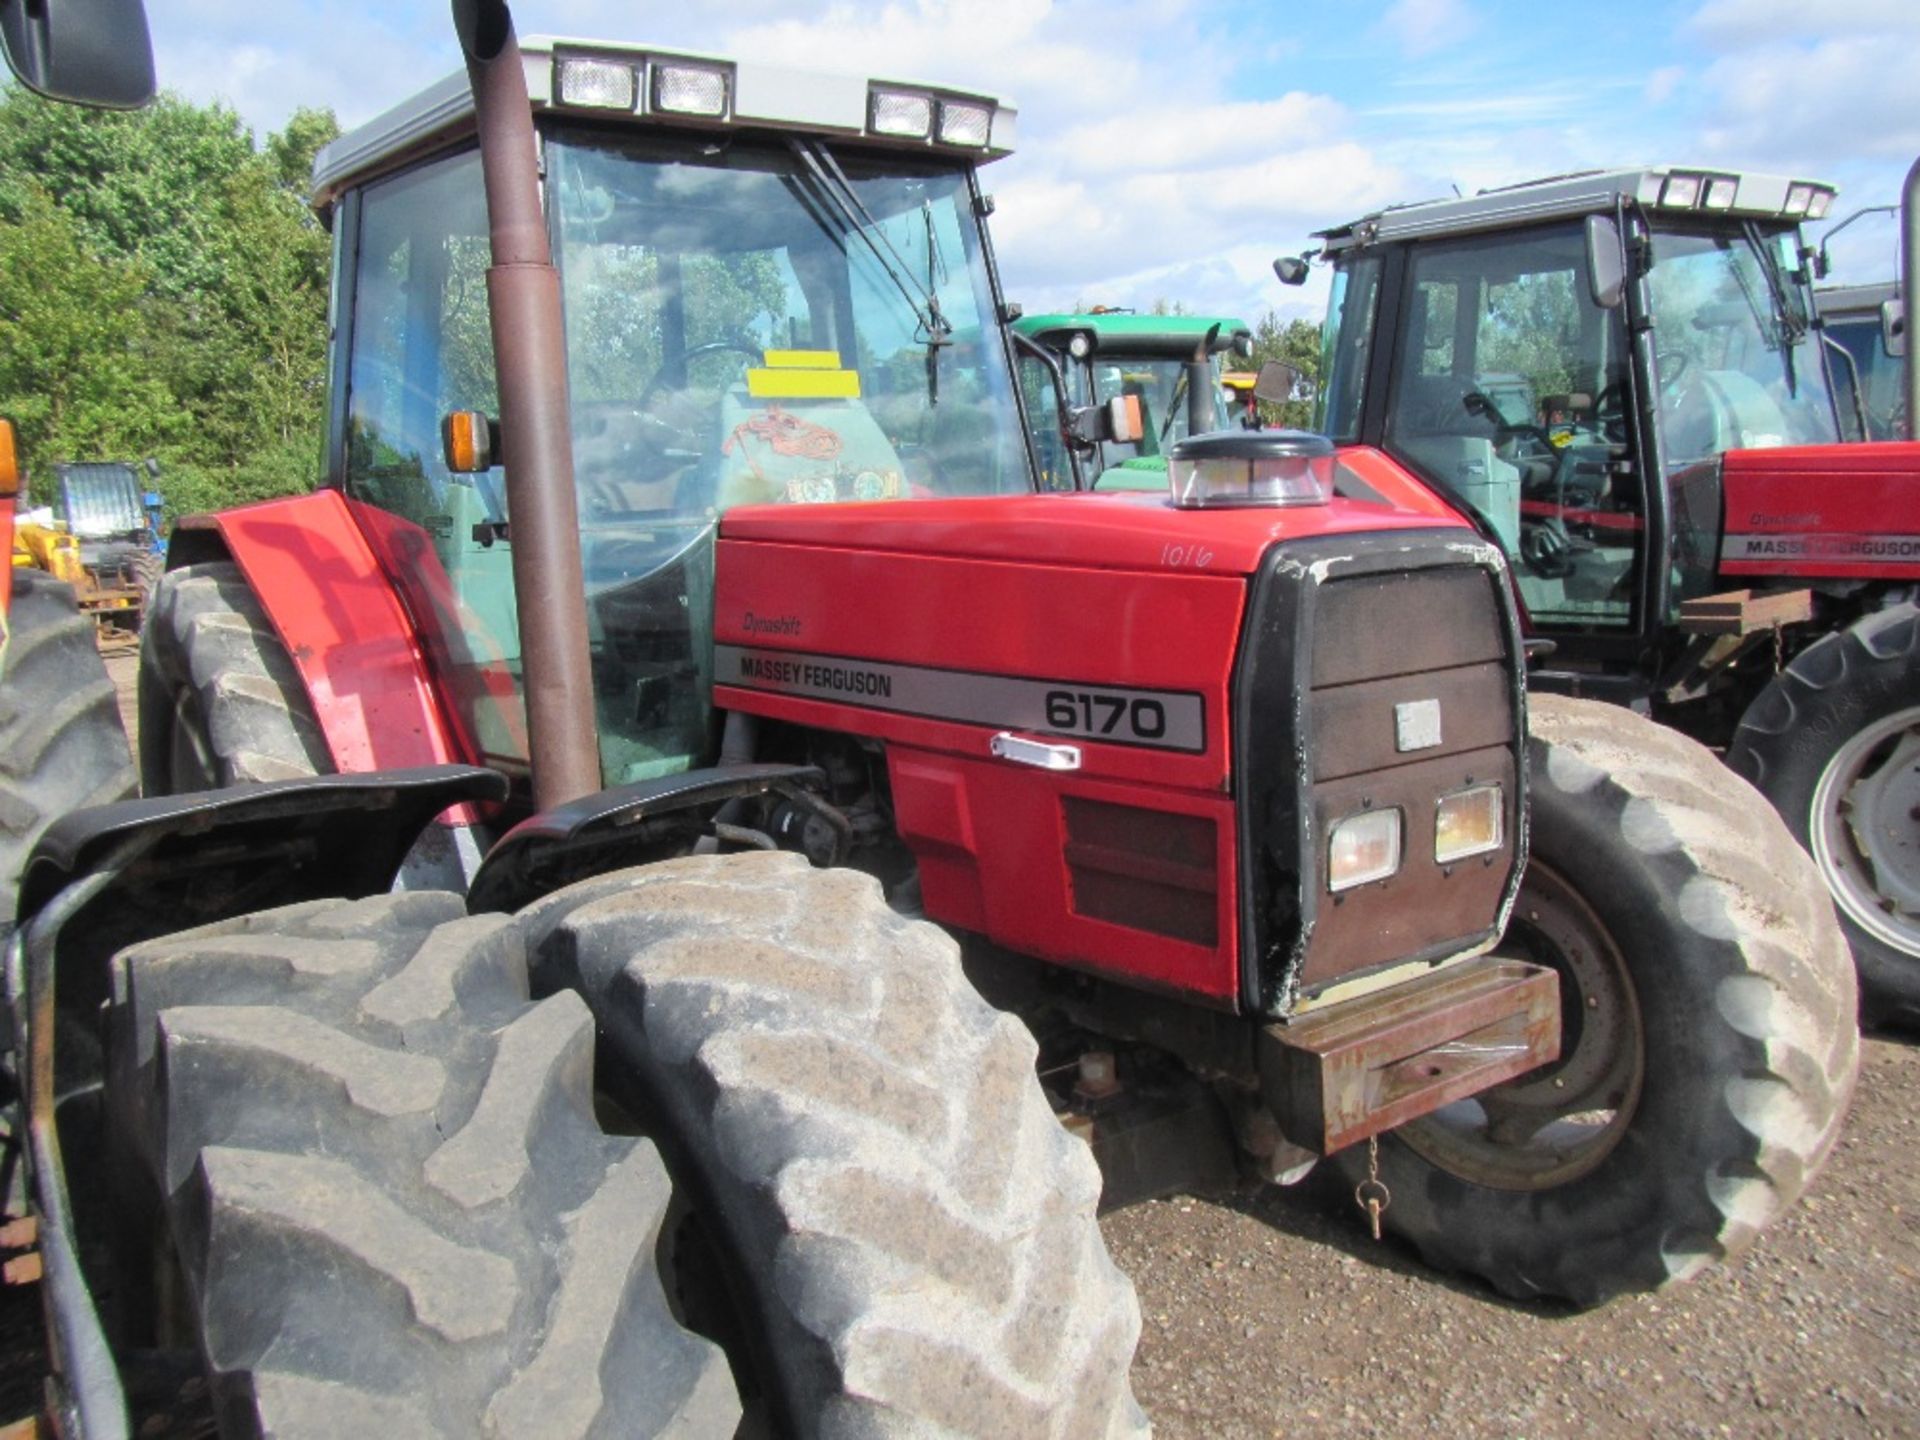 Massey Ferguson 6170 Dynashift 4wd 40k Tractor with Air Con. 5735 hrs. Reg. No. N264 JHG - Image 3 of 14